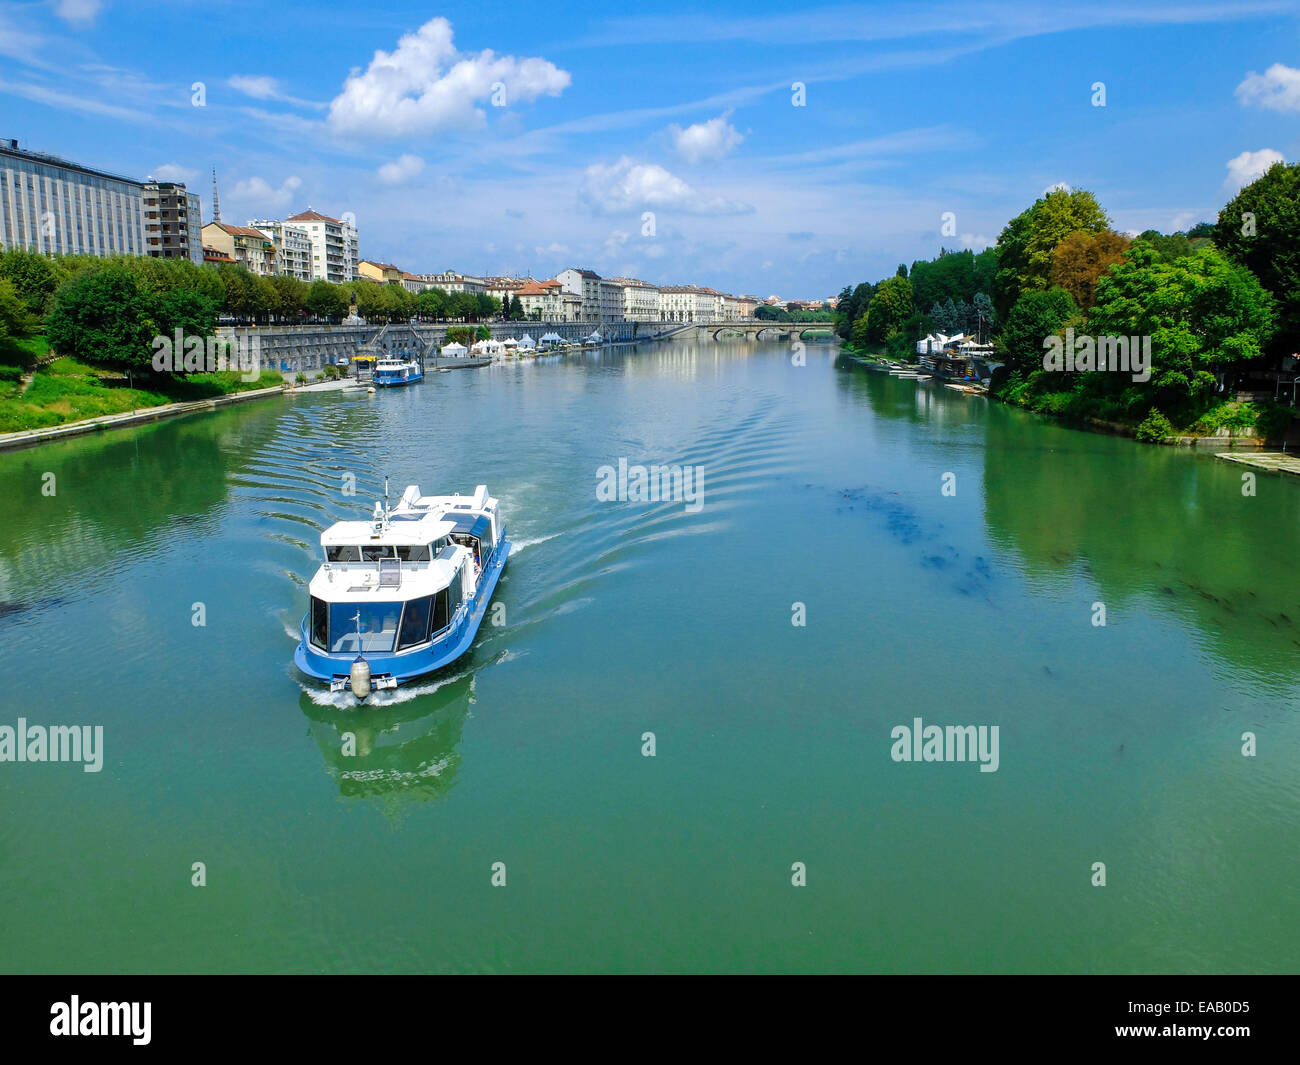 A tourist boat sails on the Po river in Turin. In the background, it's possible to see the Mole Antonelliana. Stock Photo